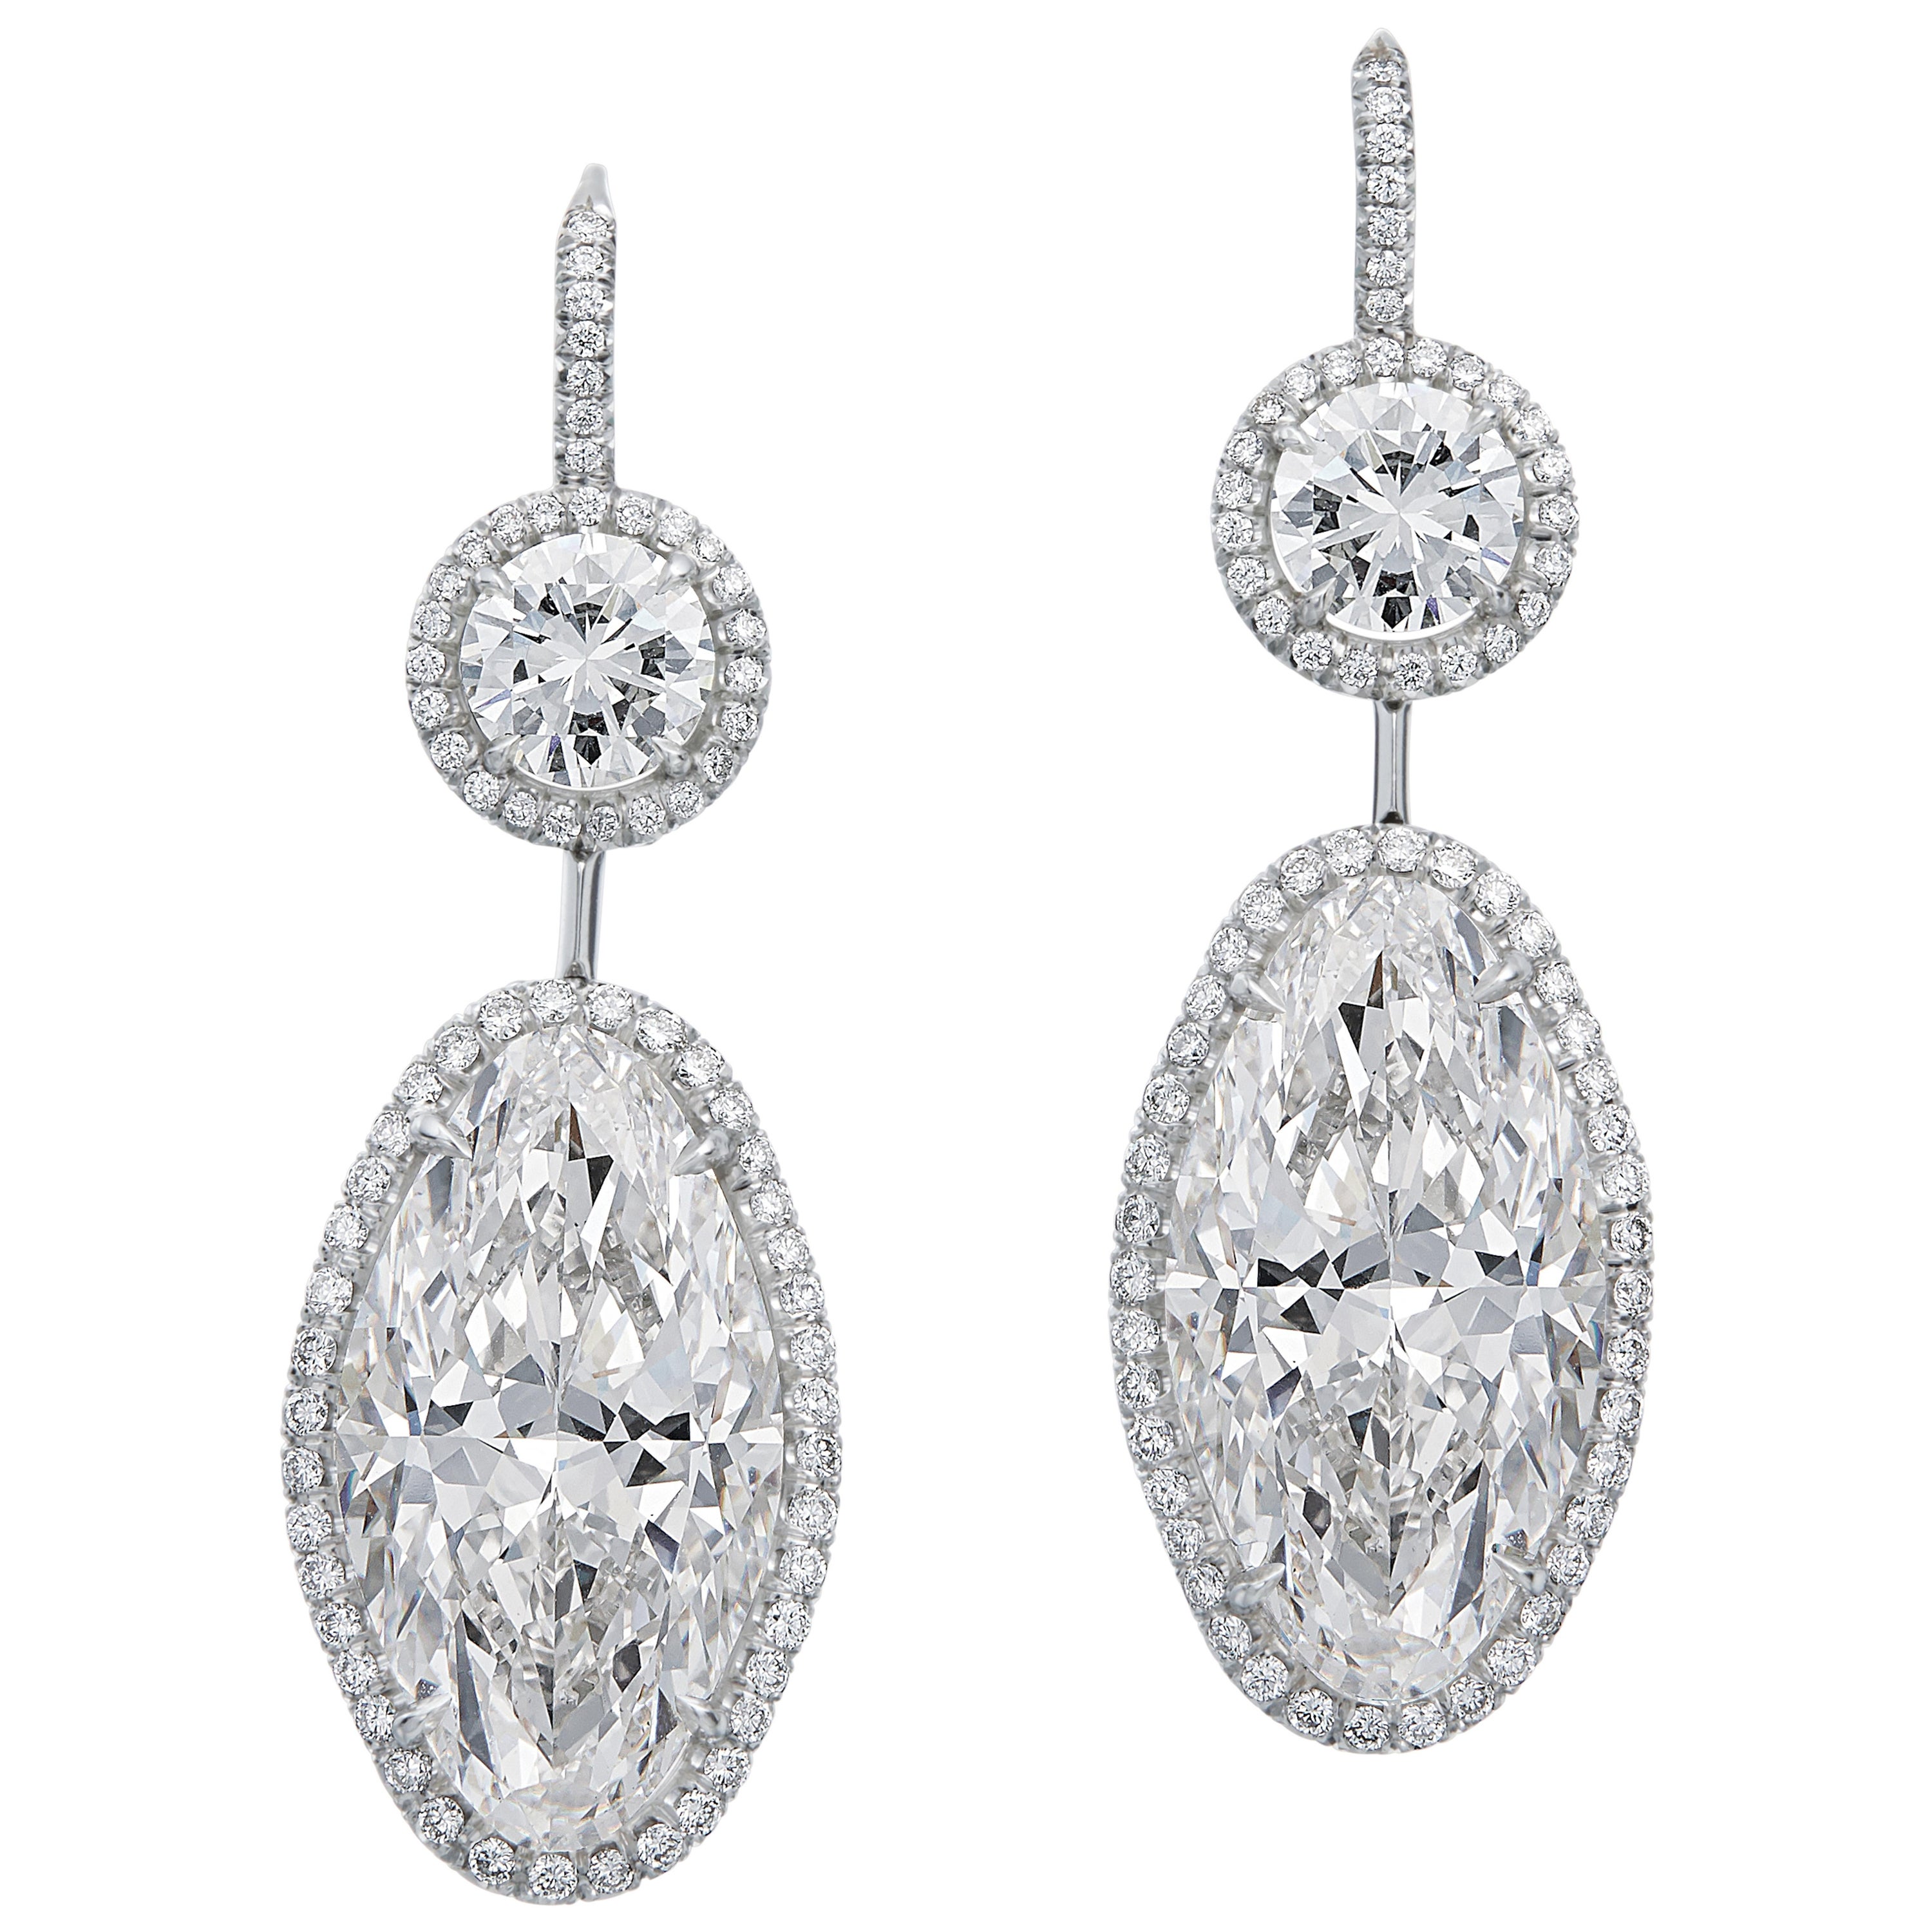 Diana  M.  Platinum fashion earrings 33.44cts Moval  shape earrings  For Sale